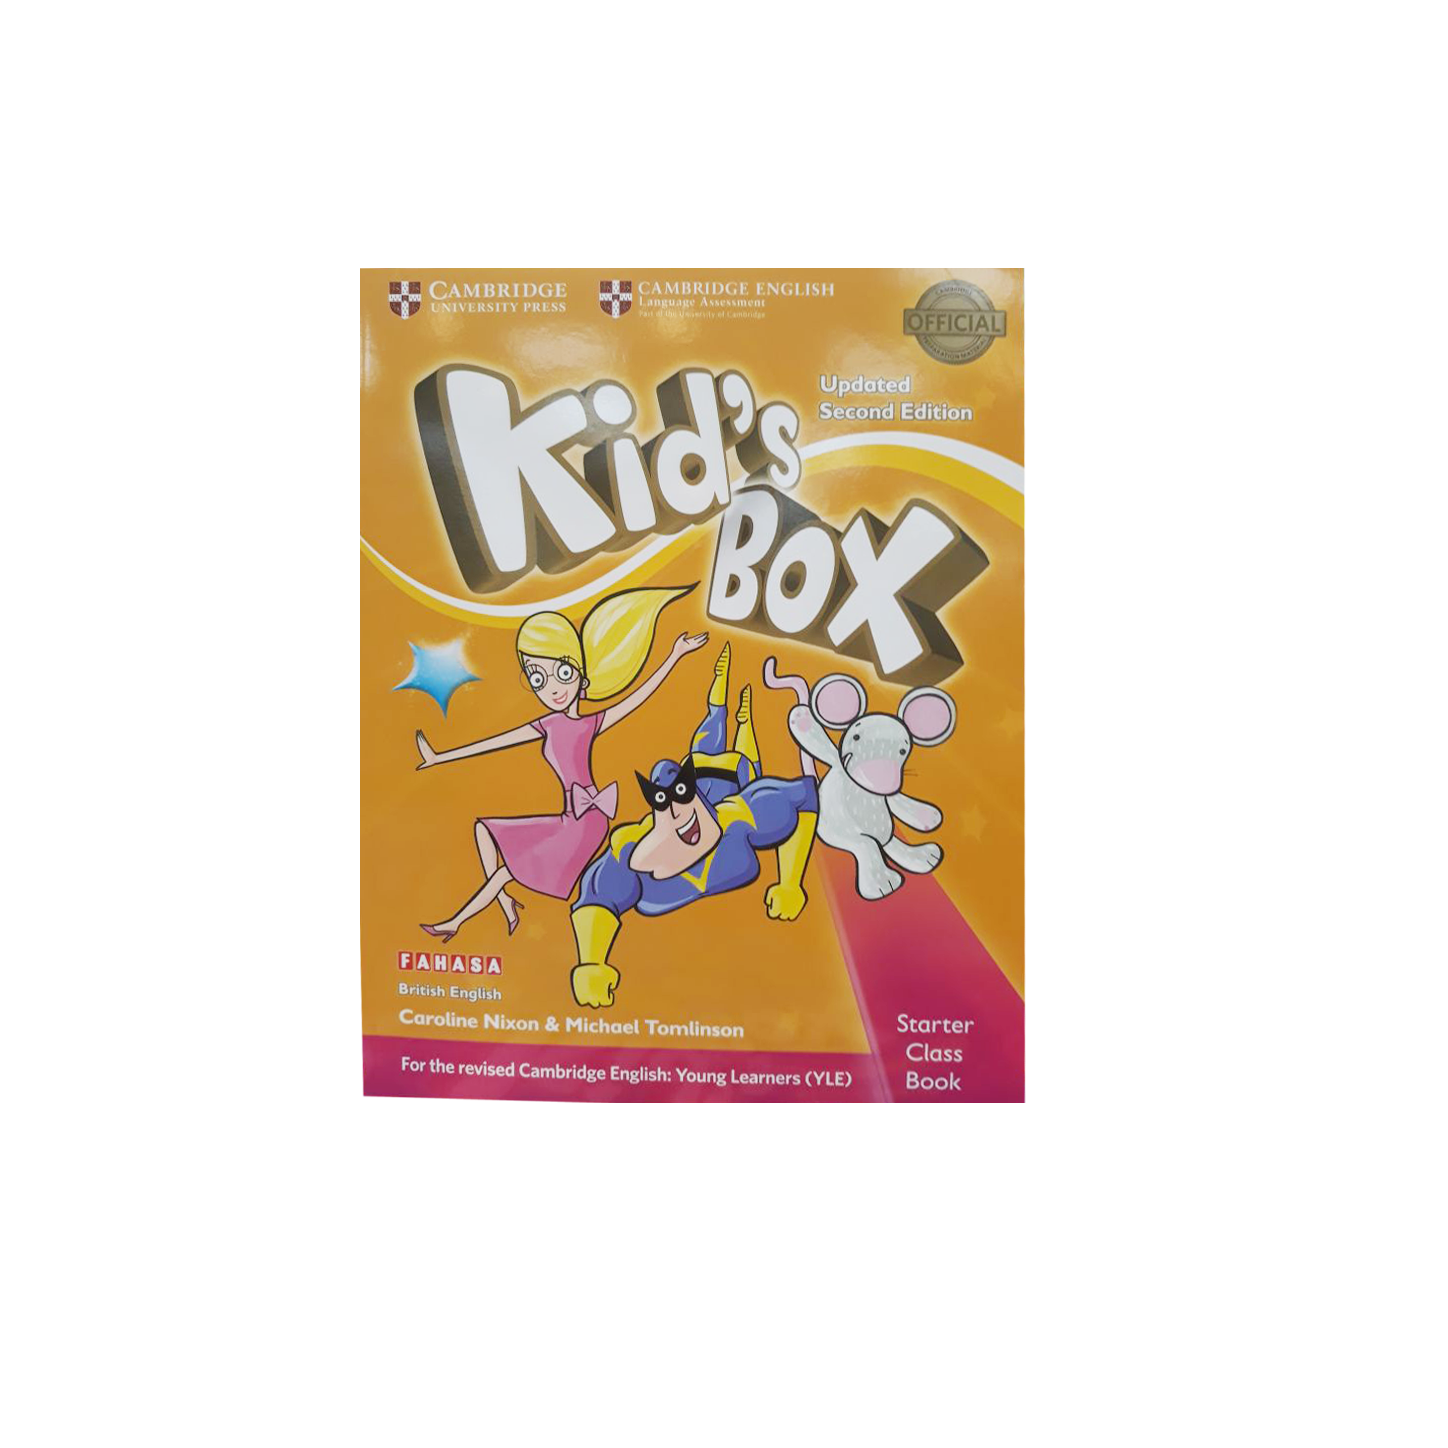 Kid's Box - Second Edition - Starters Class Book With CD-ROM